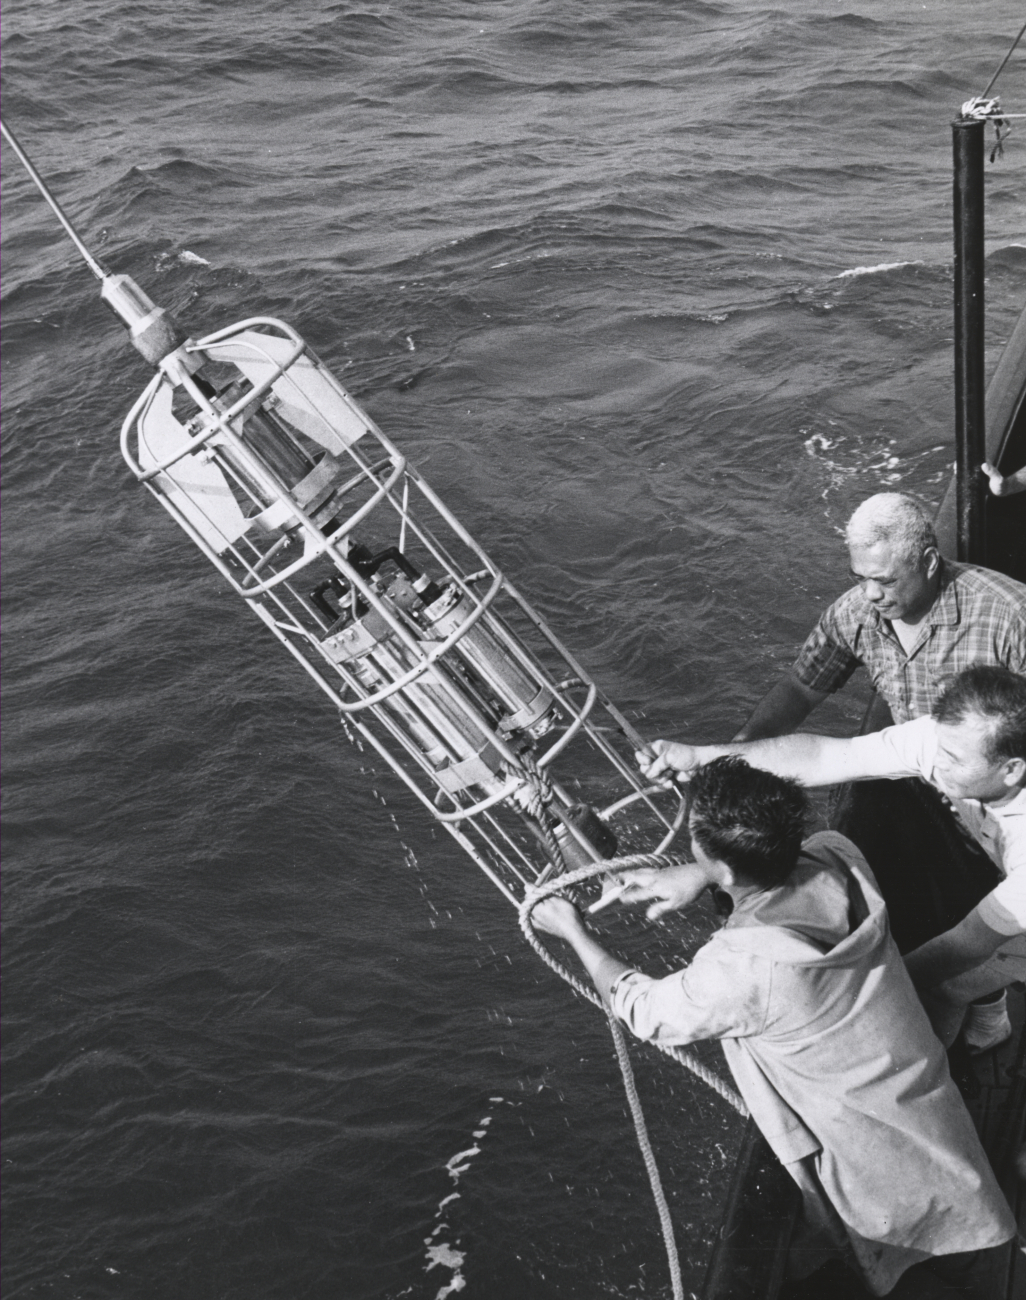 The STD recorder which provided rapid recording of salinity, temperature, anddepth